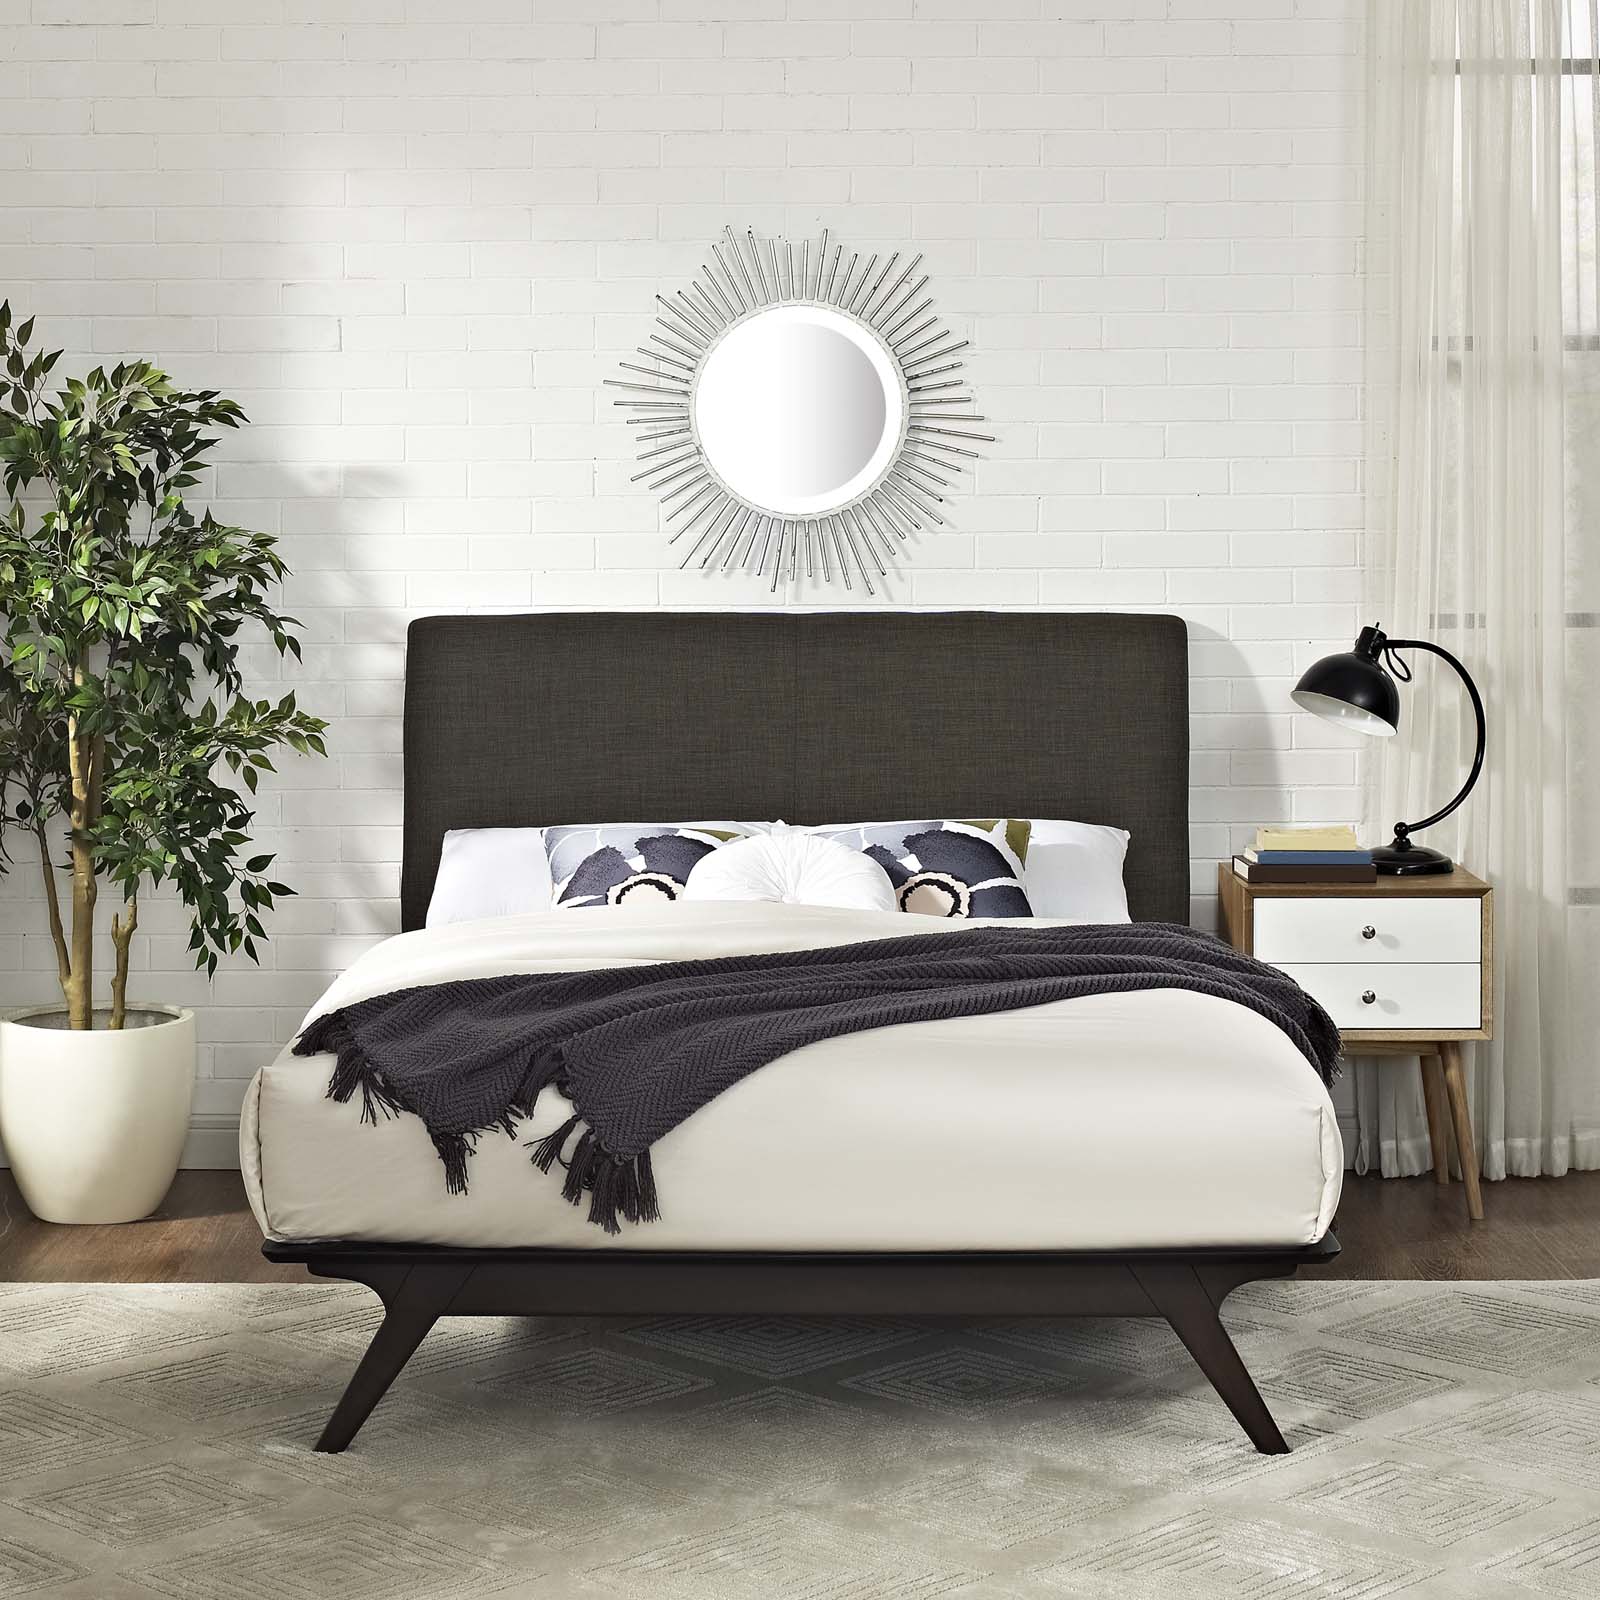 Modway Beds - Tracy Queen Bed Cappuccino Brown